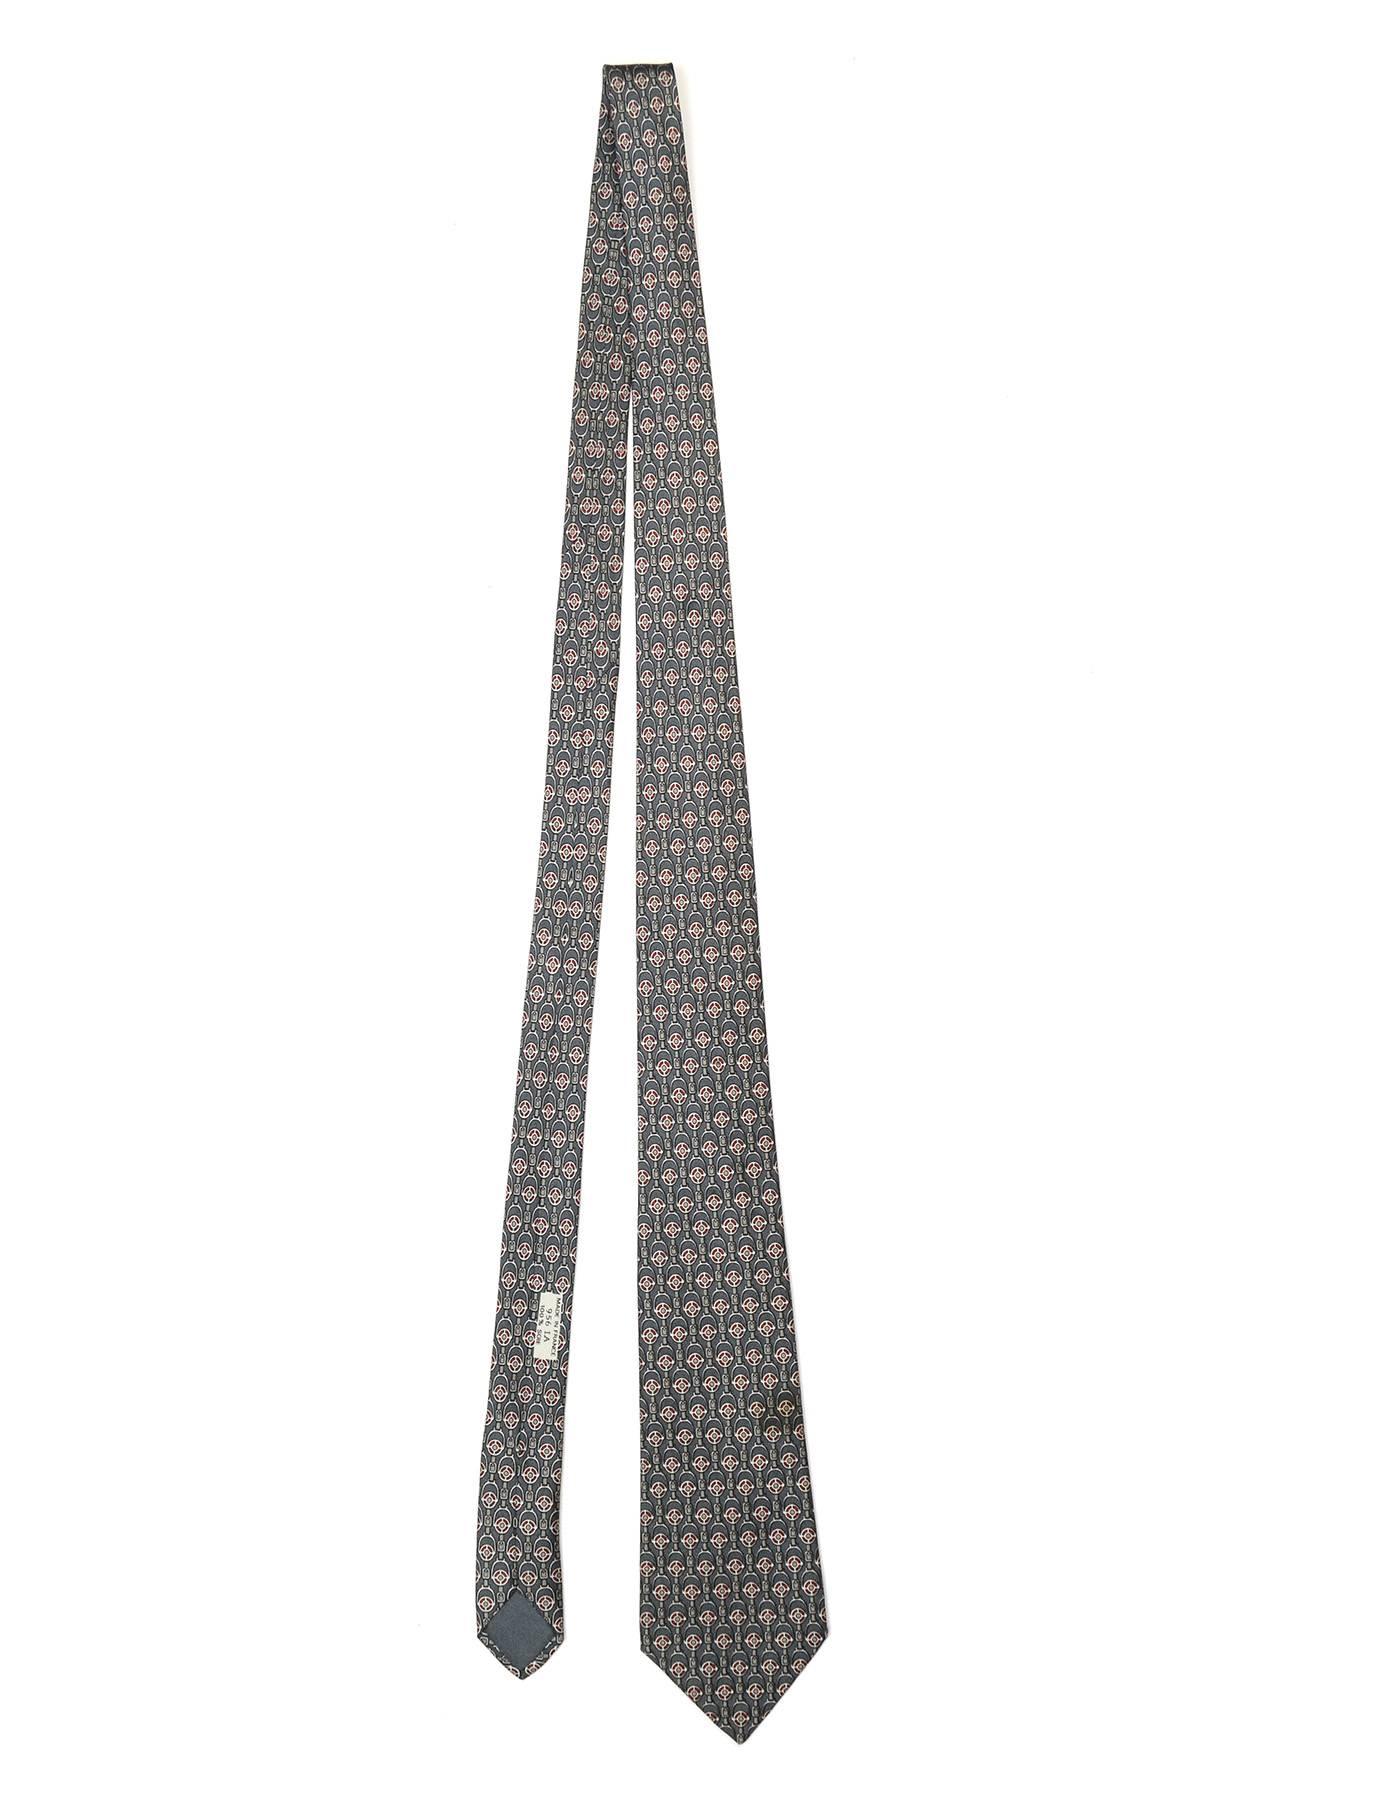 Hermes Slate Blue Stirrup Print Silk Tie

Made In: France
Color: Slate blue and red
Composition: 100% silk
Retail Price: $180 + tax
Overall Condition: Excellent pre-owned condition
Measurements: 
Length: 57.5"
Width: 1.5"-3.25"